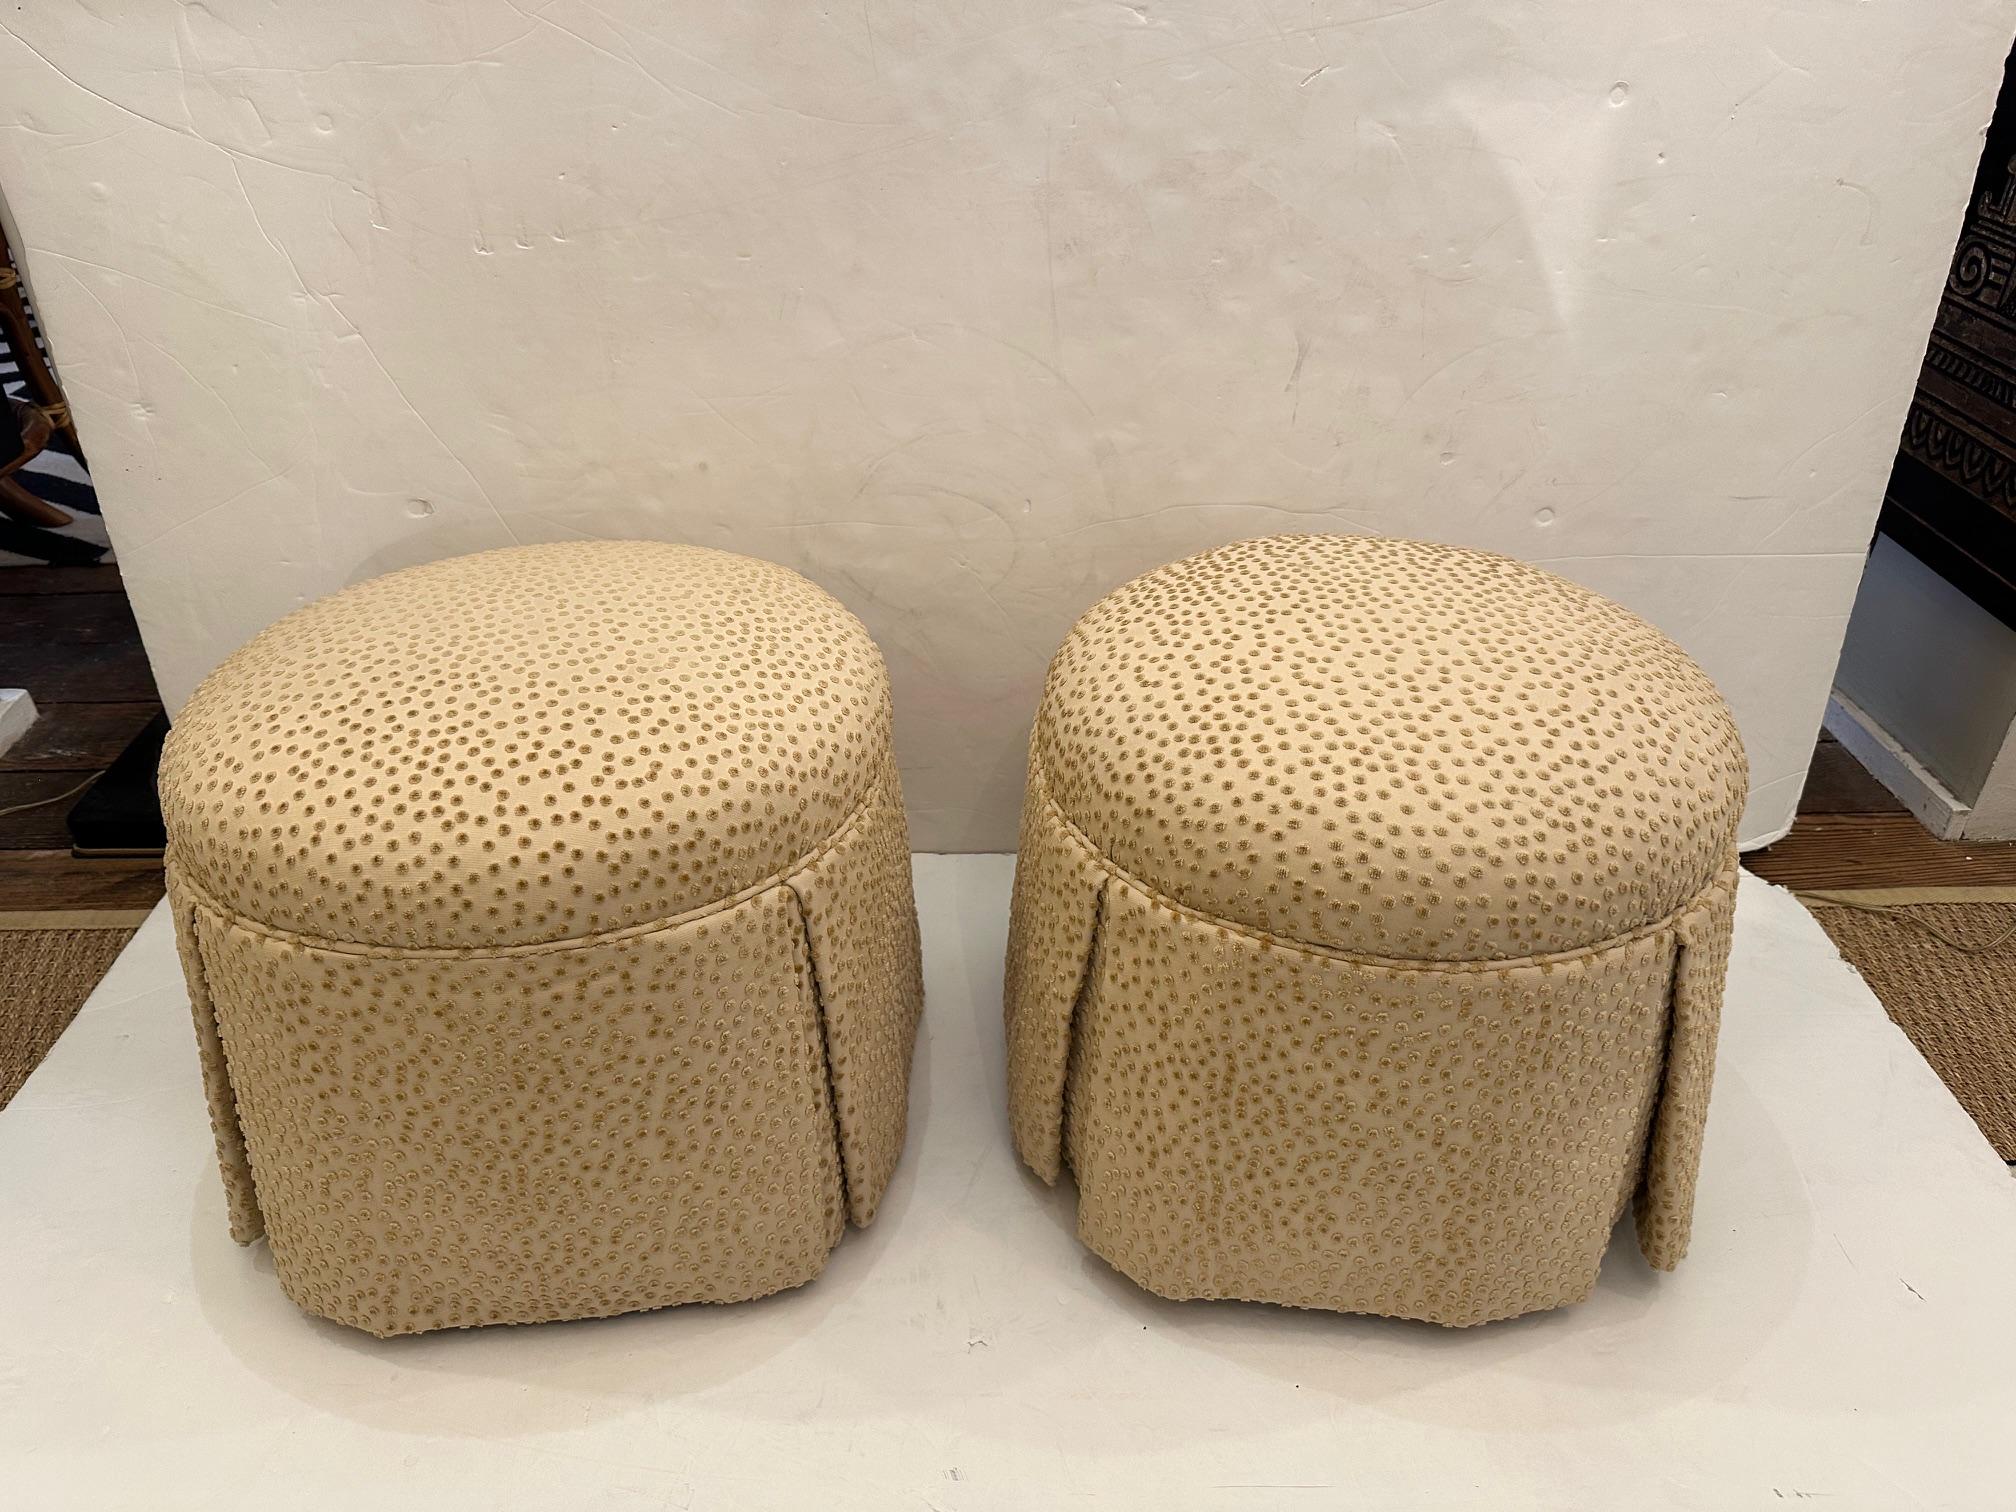 Functional and glamorous pair of round comfortable upholstered ottoman poufs having fabulous raised taupe polka dots on cream backgrounds.  The stools roll easily on casters.